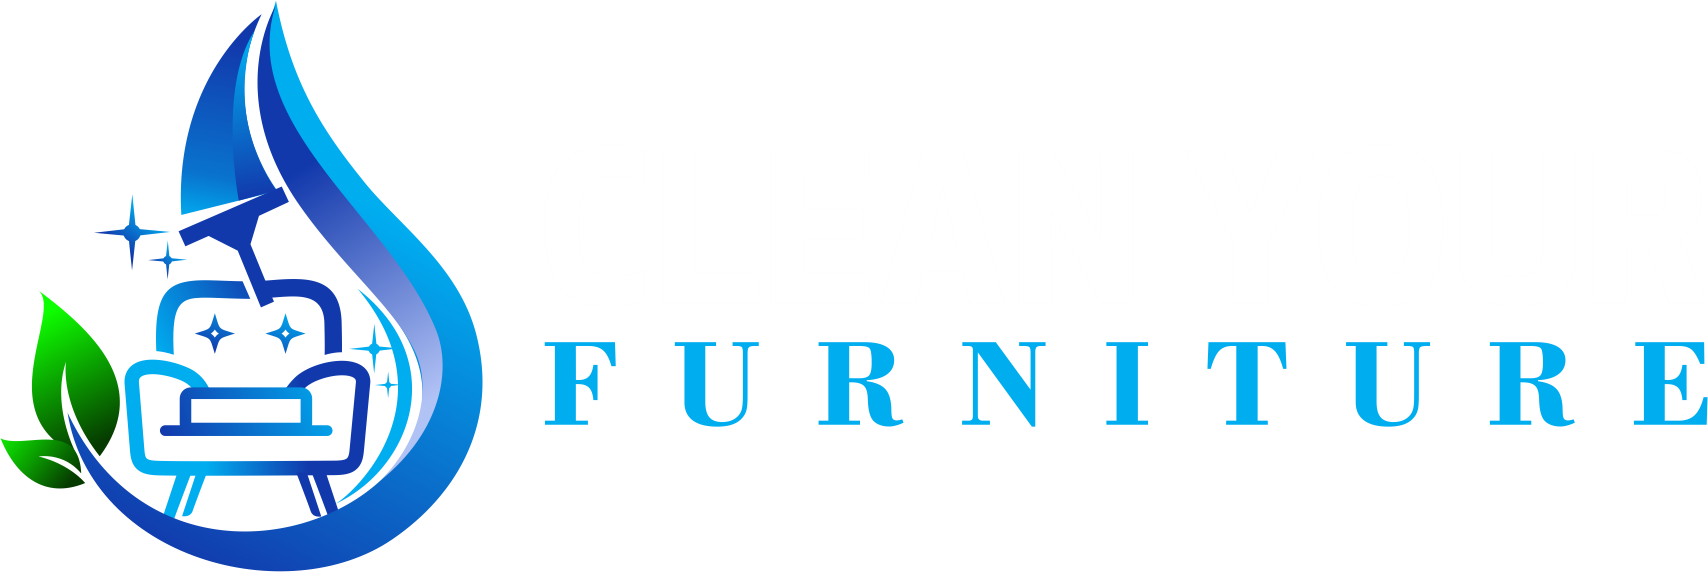 Clean Your Furniture Logo